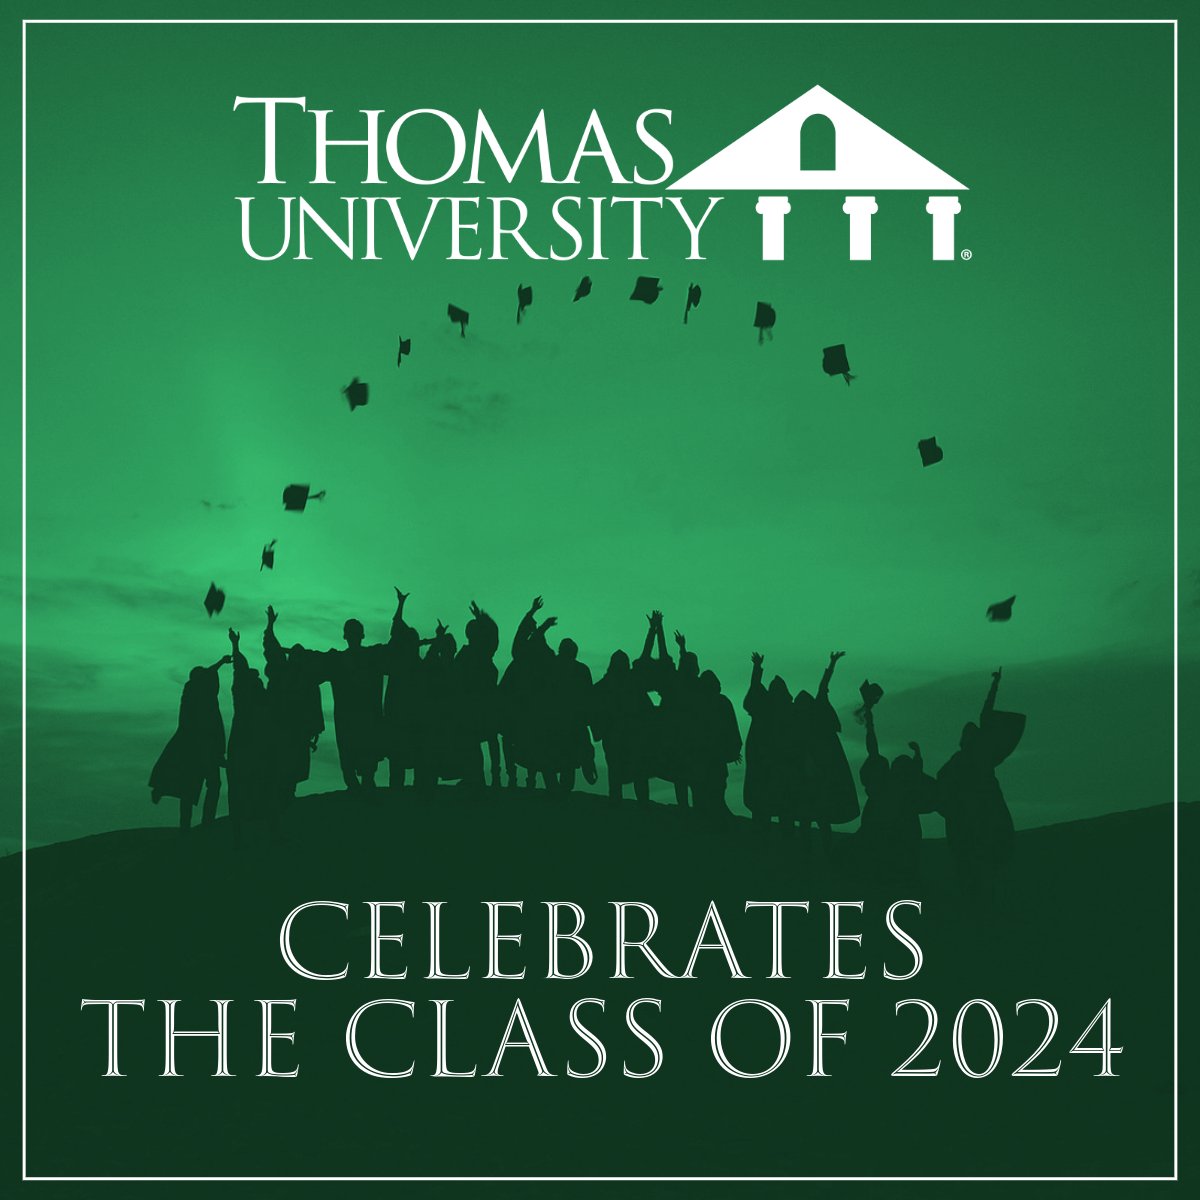 ❗❗Mark your calendars! ❗❗ Thomas University Commencement is set for Saturday, May 4th! Stay tuned - more information to come on times and links for the live stream right here.